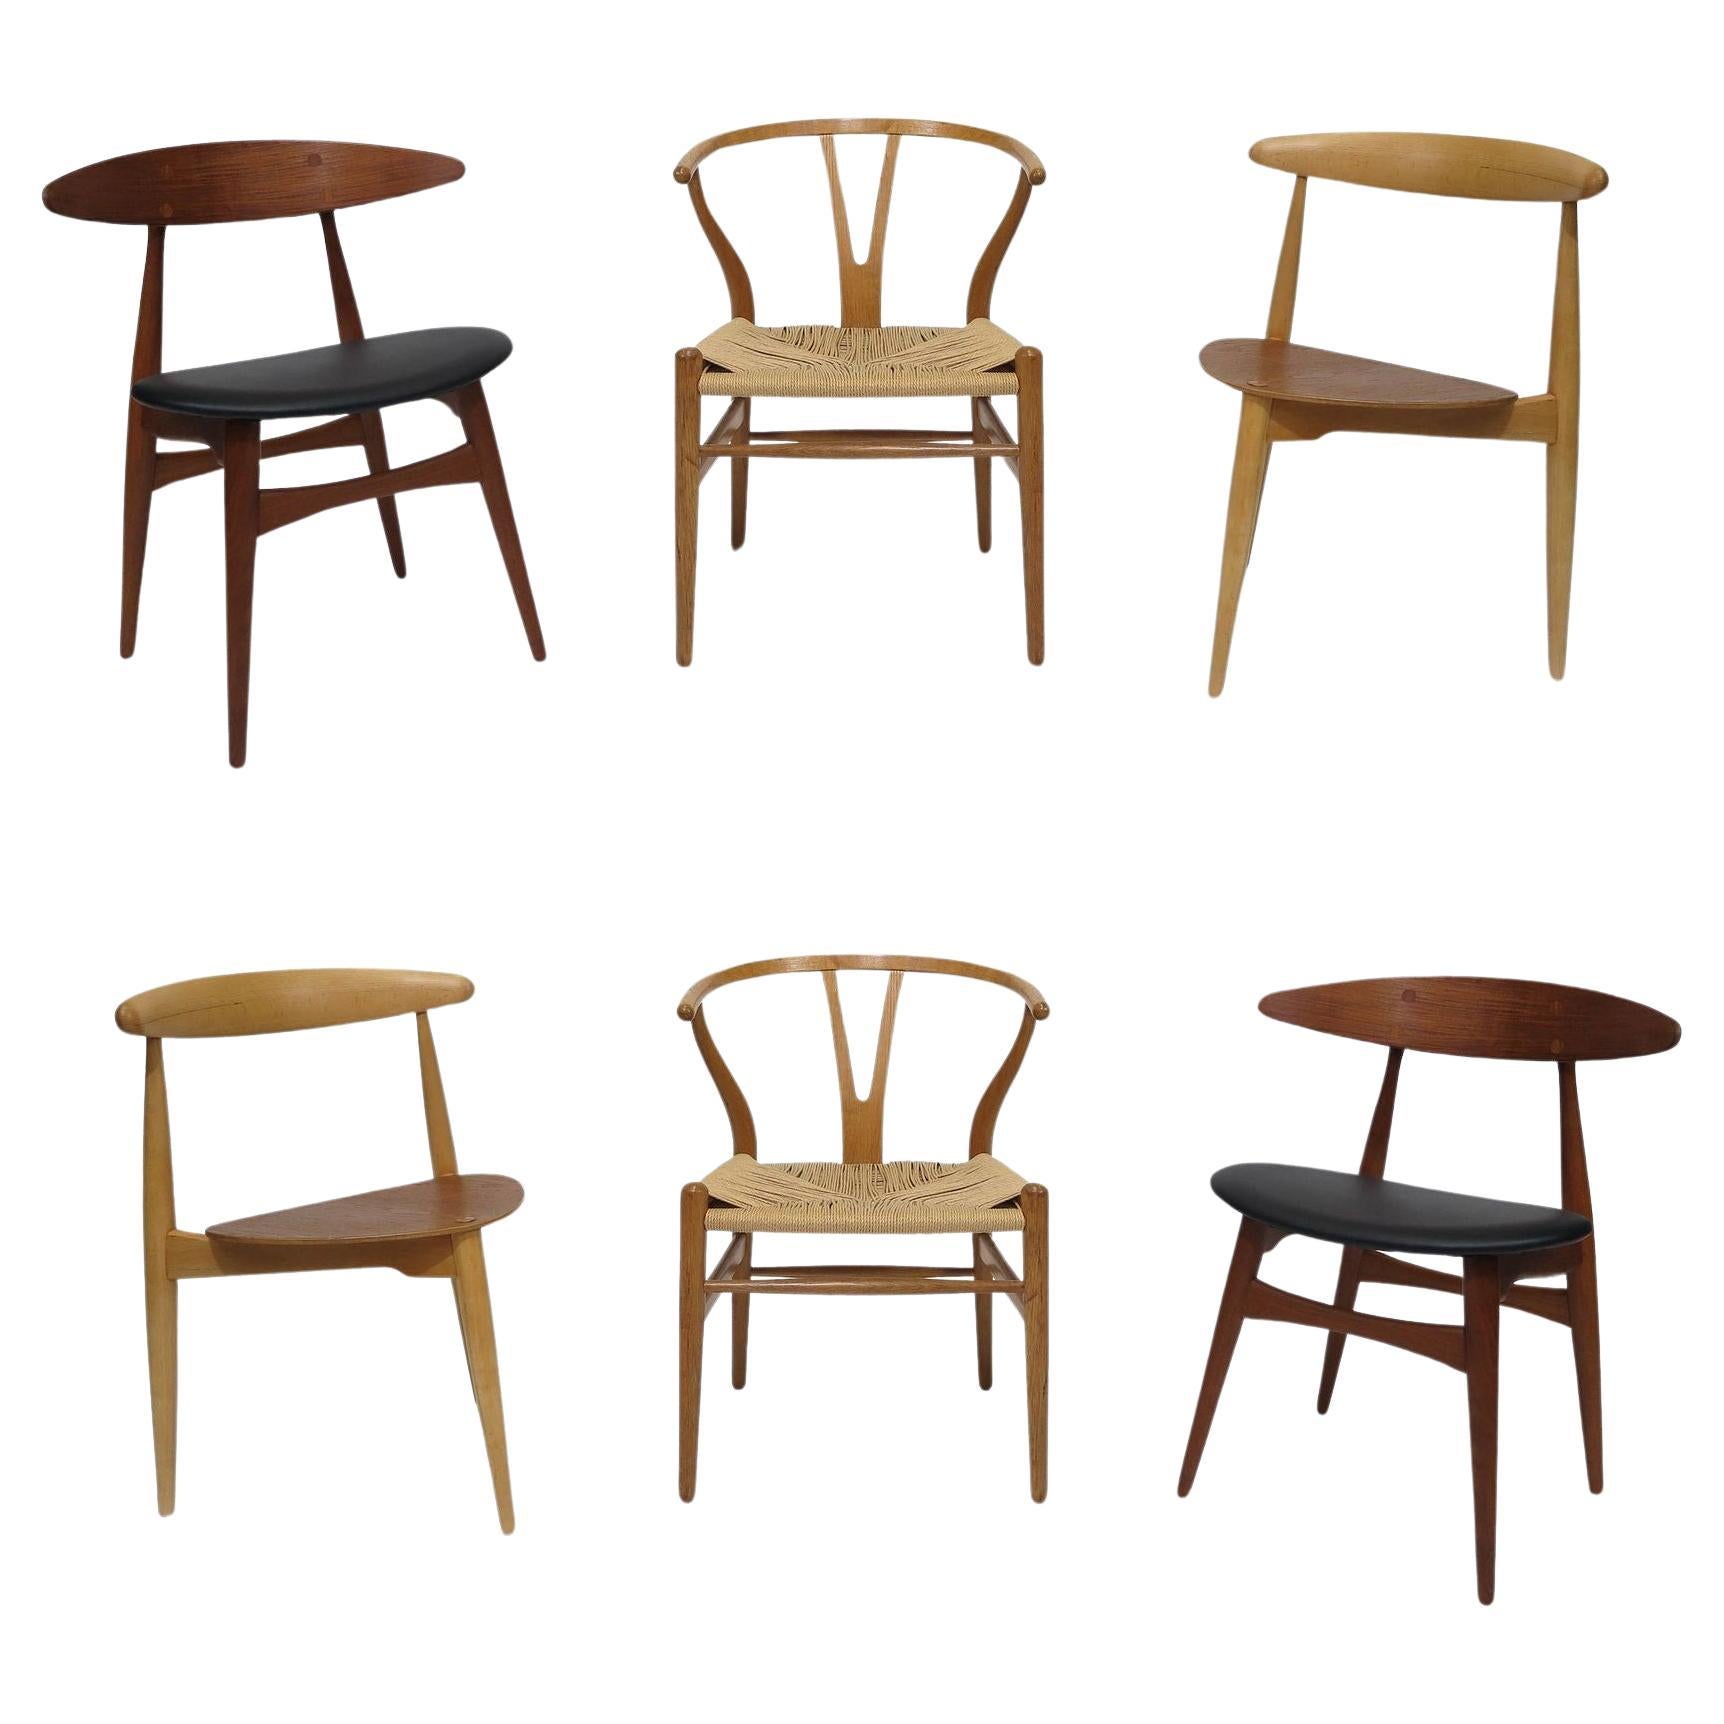 Collection of 6 Hans Wegner Chairs, Wishbone, Heart, CH33